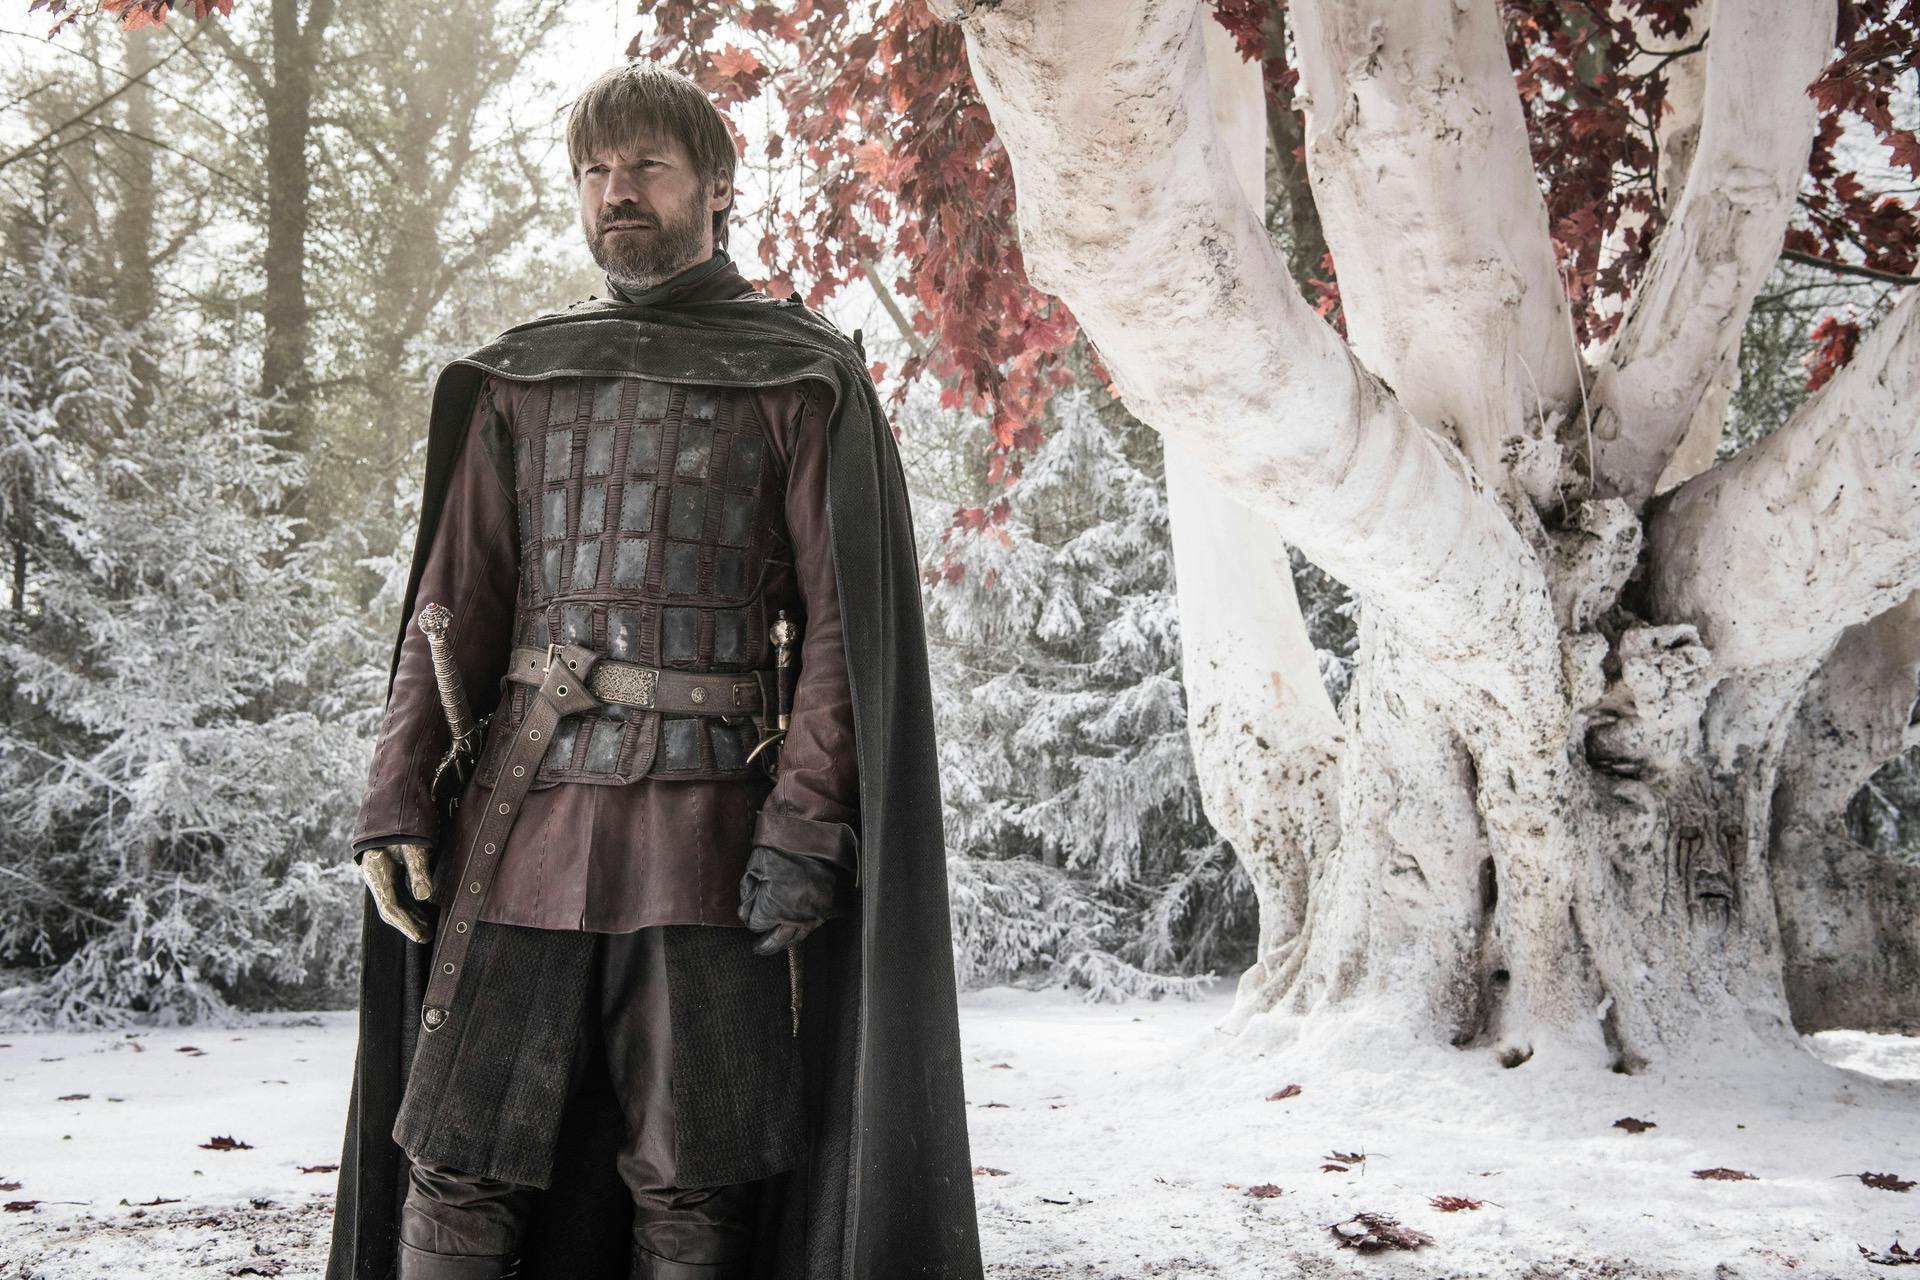 jaime lannister stands in front of white tree